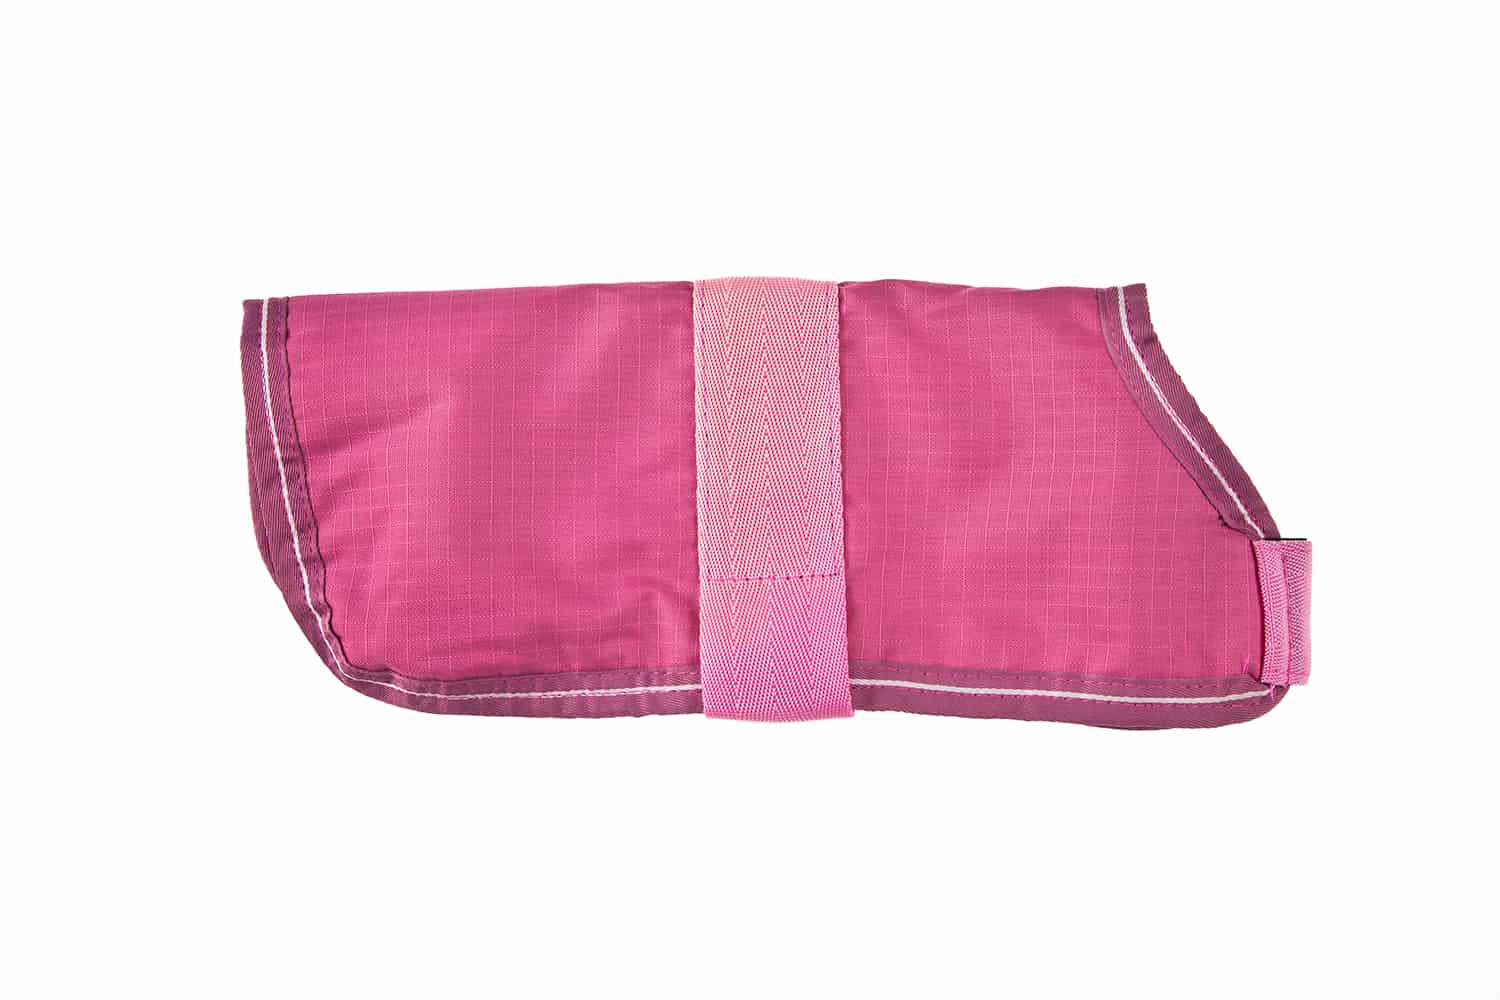 Image of Luxury Waterproof Dog Coat With Fur Lining - Pink - 30 Inch